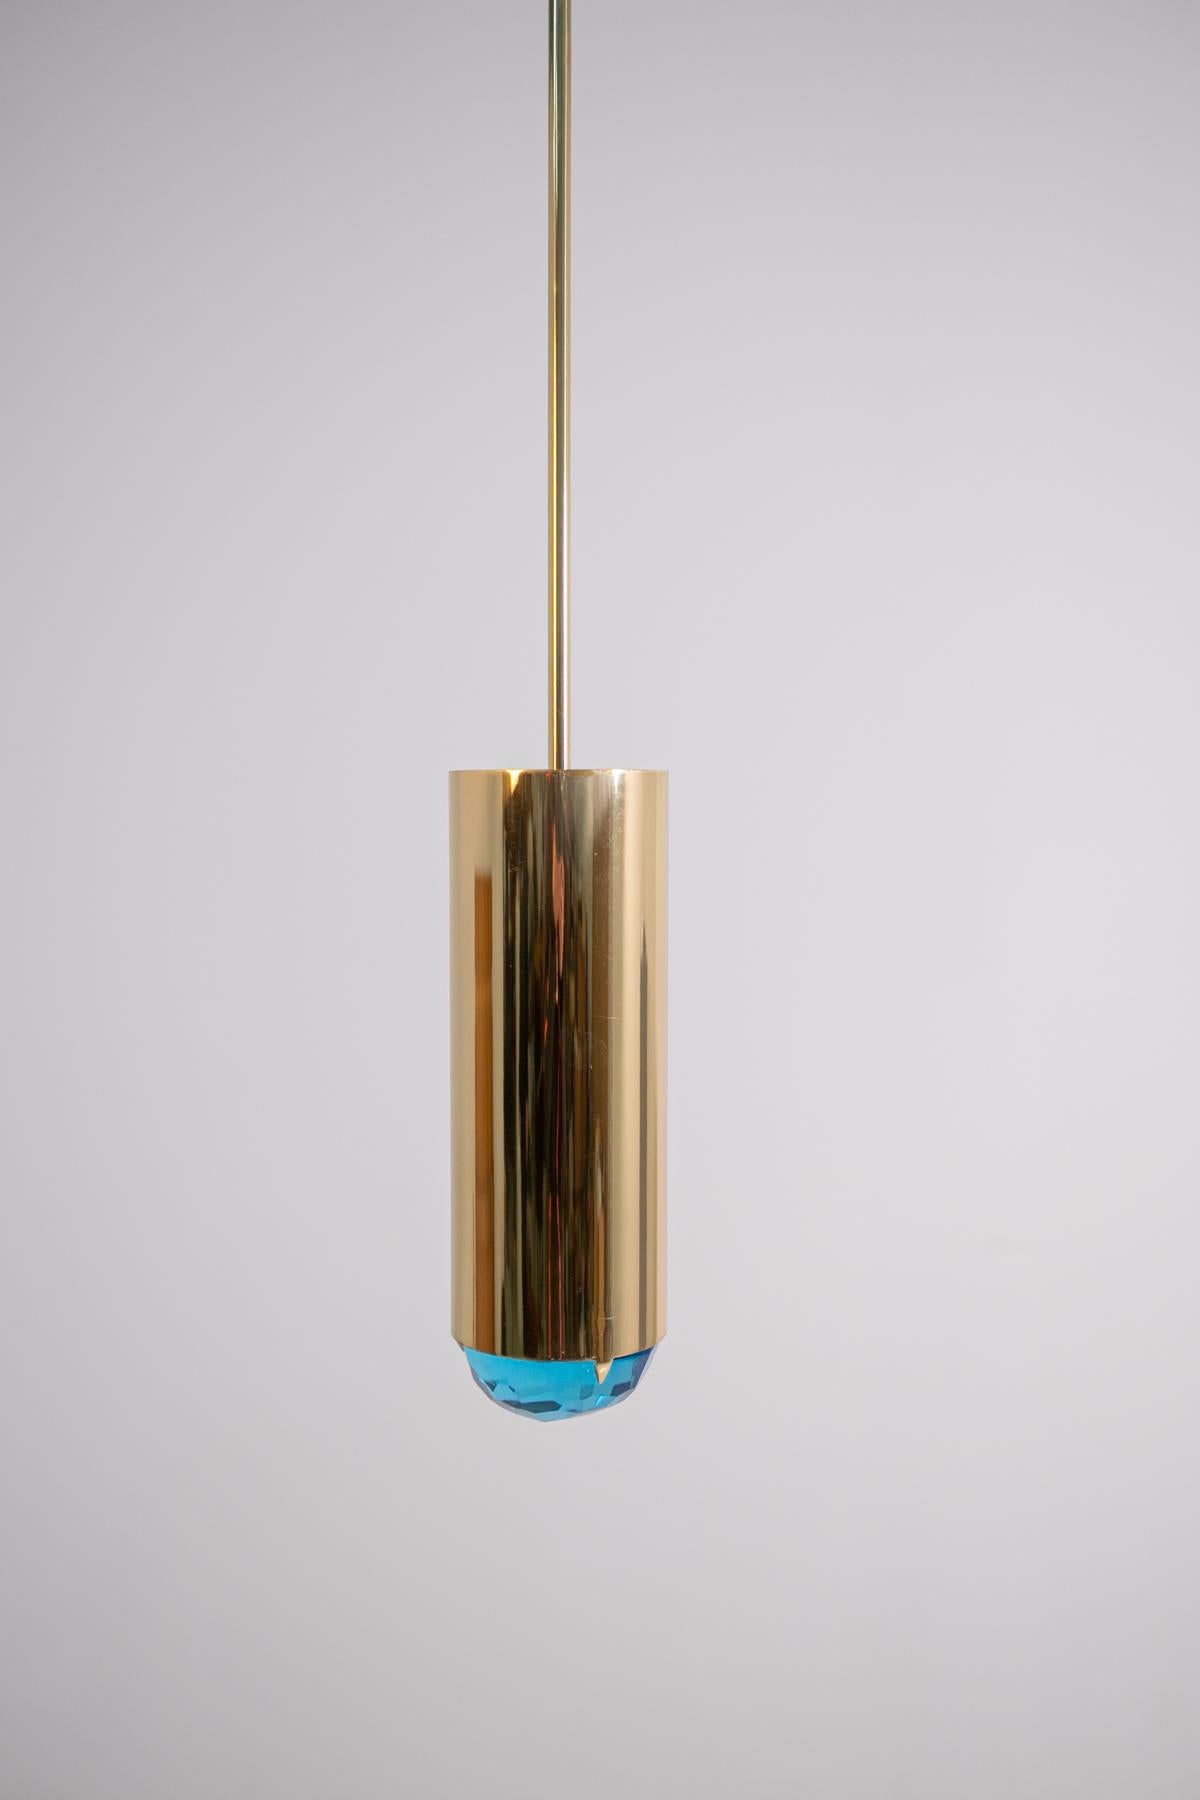 Contemporary Italian Pendant by Ghirò in Brass and Blue Glass, Signed 2020 For Sale